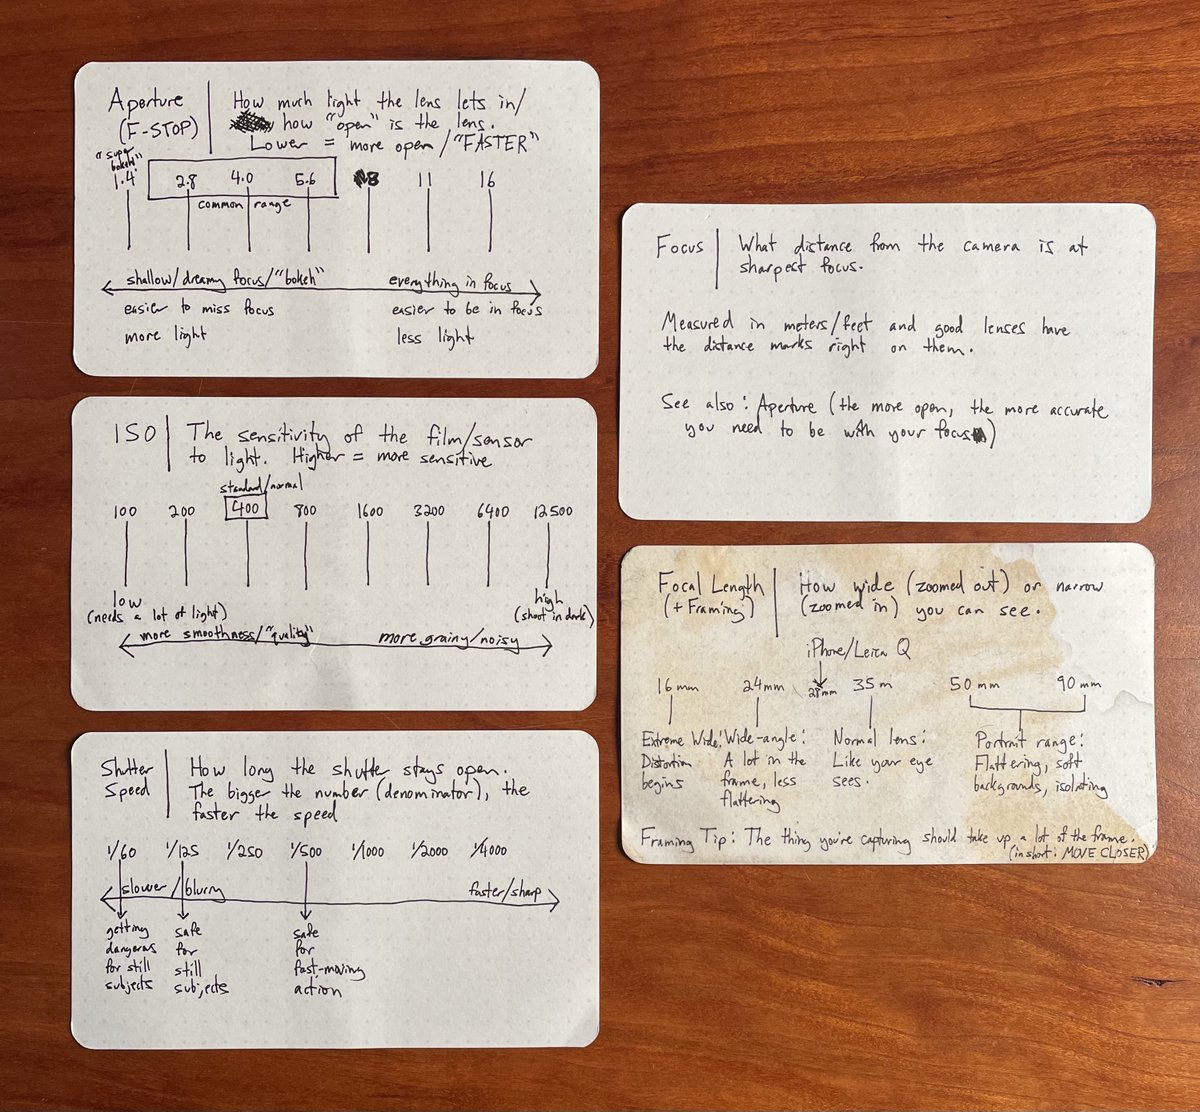 So that's it: Everything you need to know about photography in 5 tweets. This applies equally to cinematography with one constraint/rule-of-thumb around shutter speed (it should generally be a 48th of a second, or double your frames per second). Here are the original index cards.